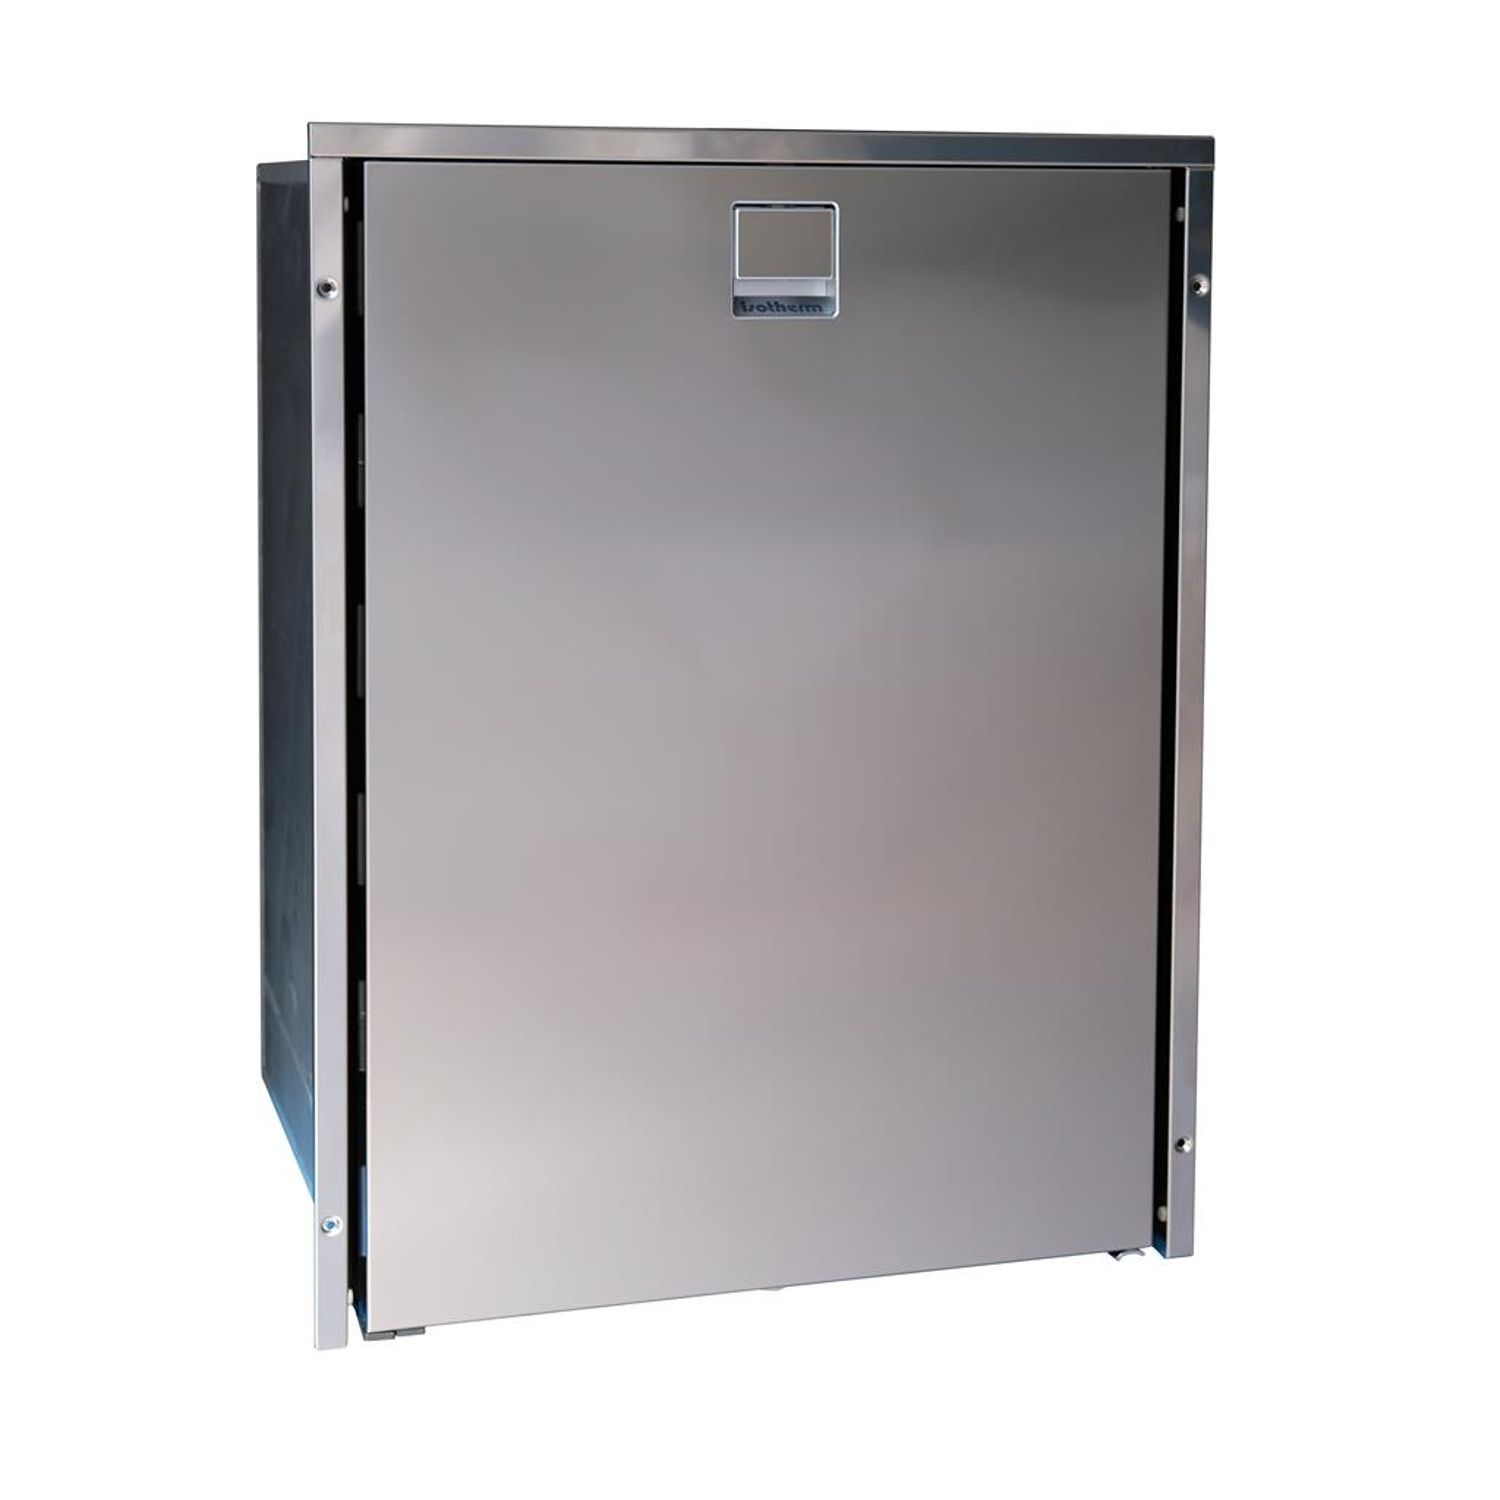 Isotherm CR130 Kyl Inox Clean Touch